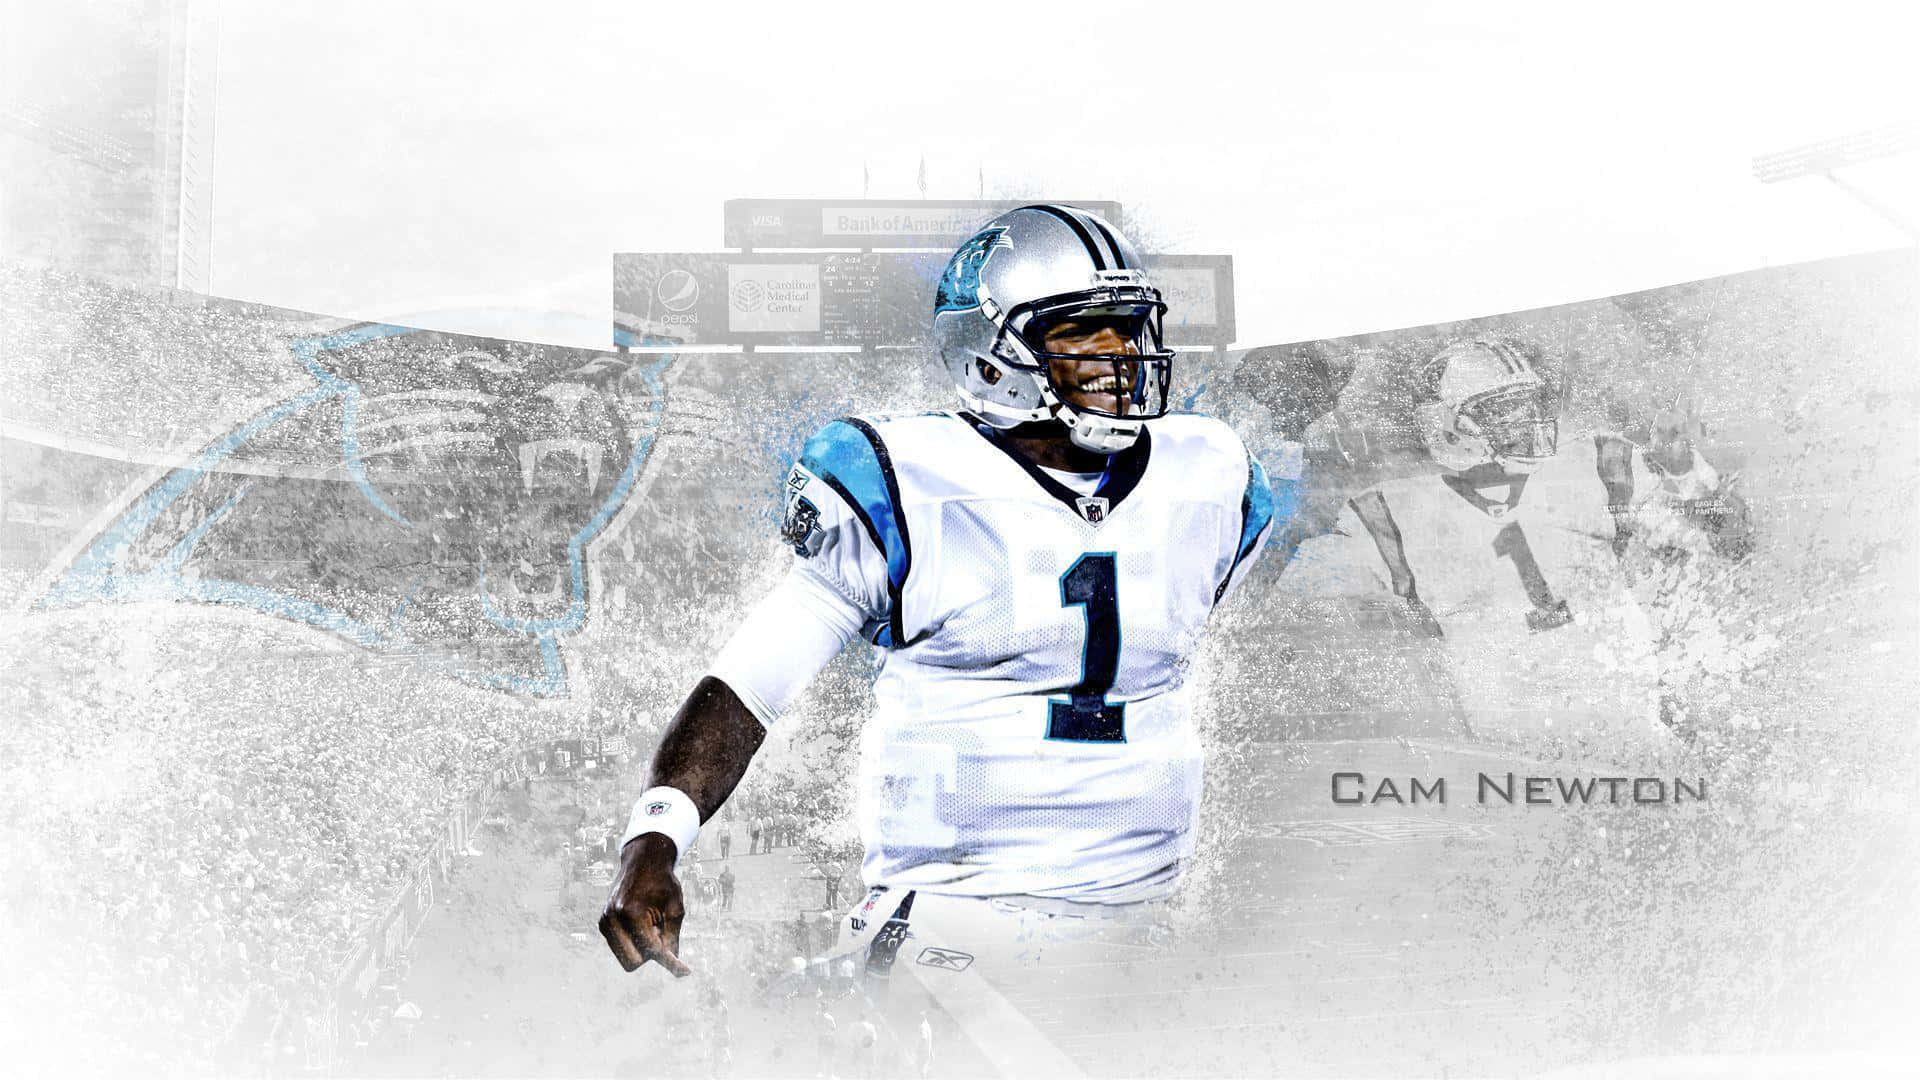 Cam Newton waves to the crowd after a great performance Wallpaper